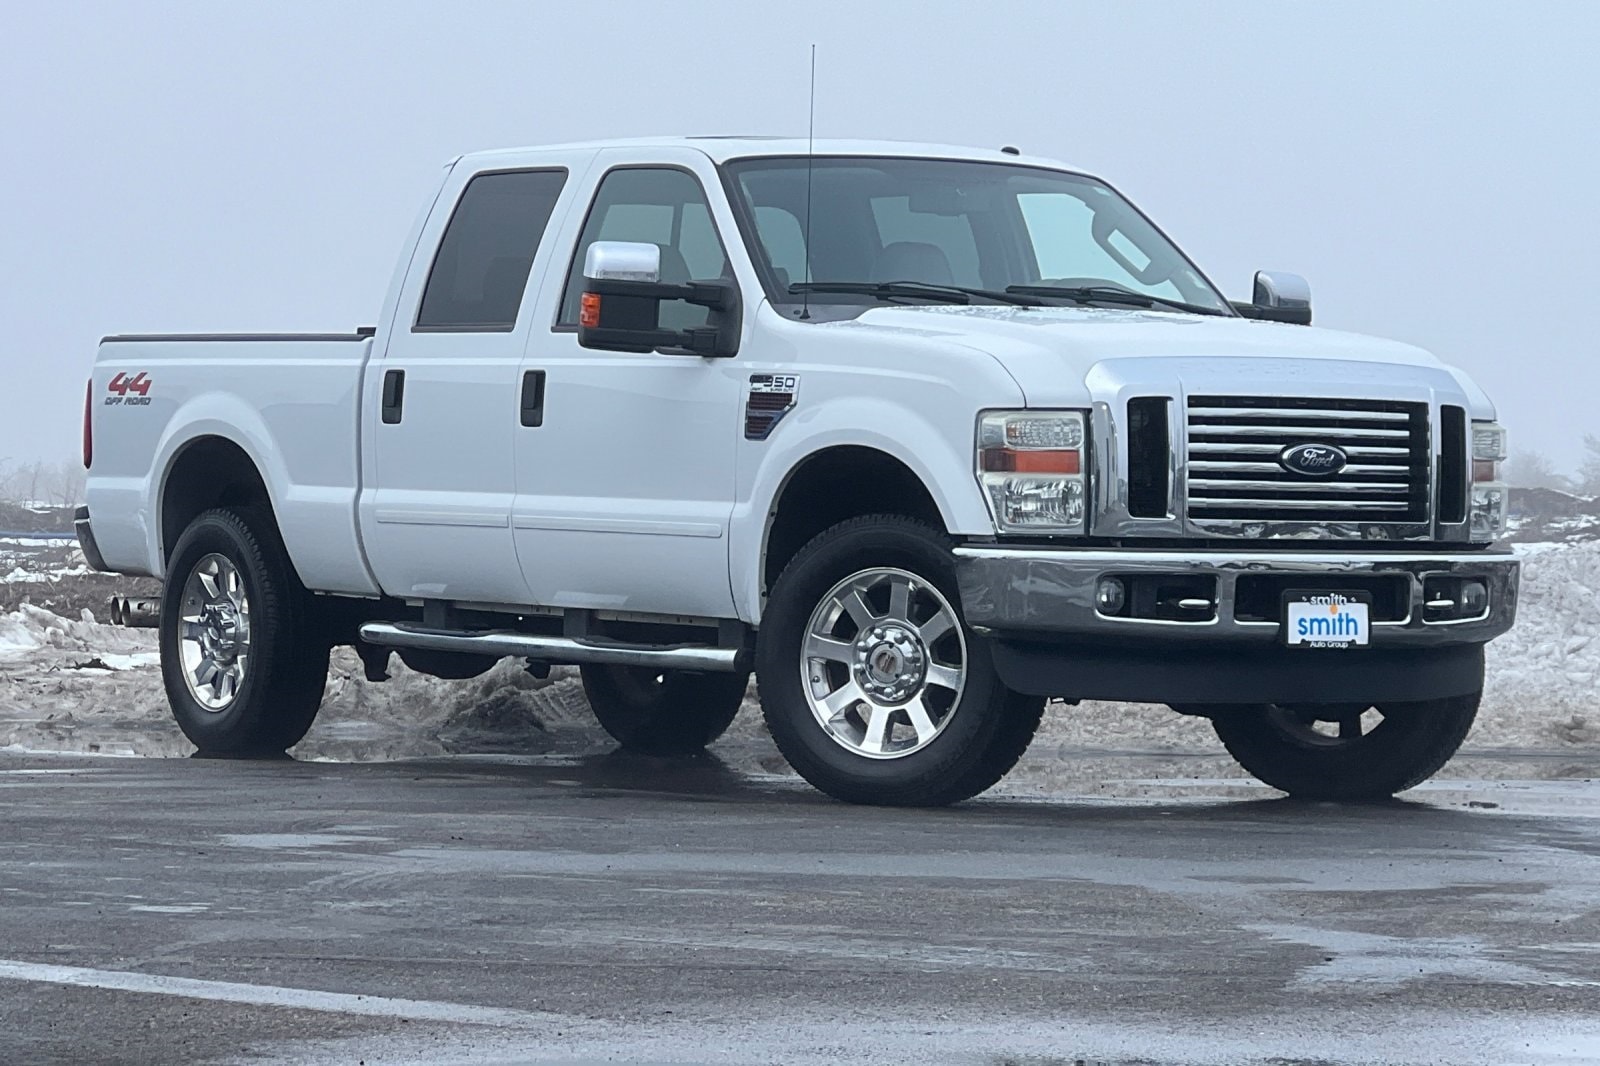 Used 2008 Ford F-350 Super Duty Lariat with VIN 1FTWW31R48ED59759 for sale in Weiser, ID